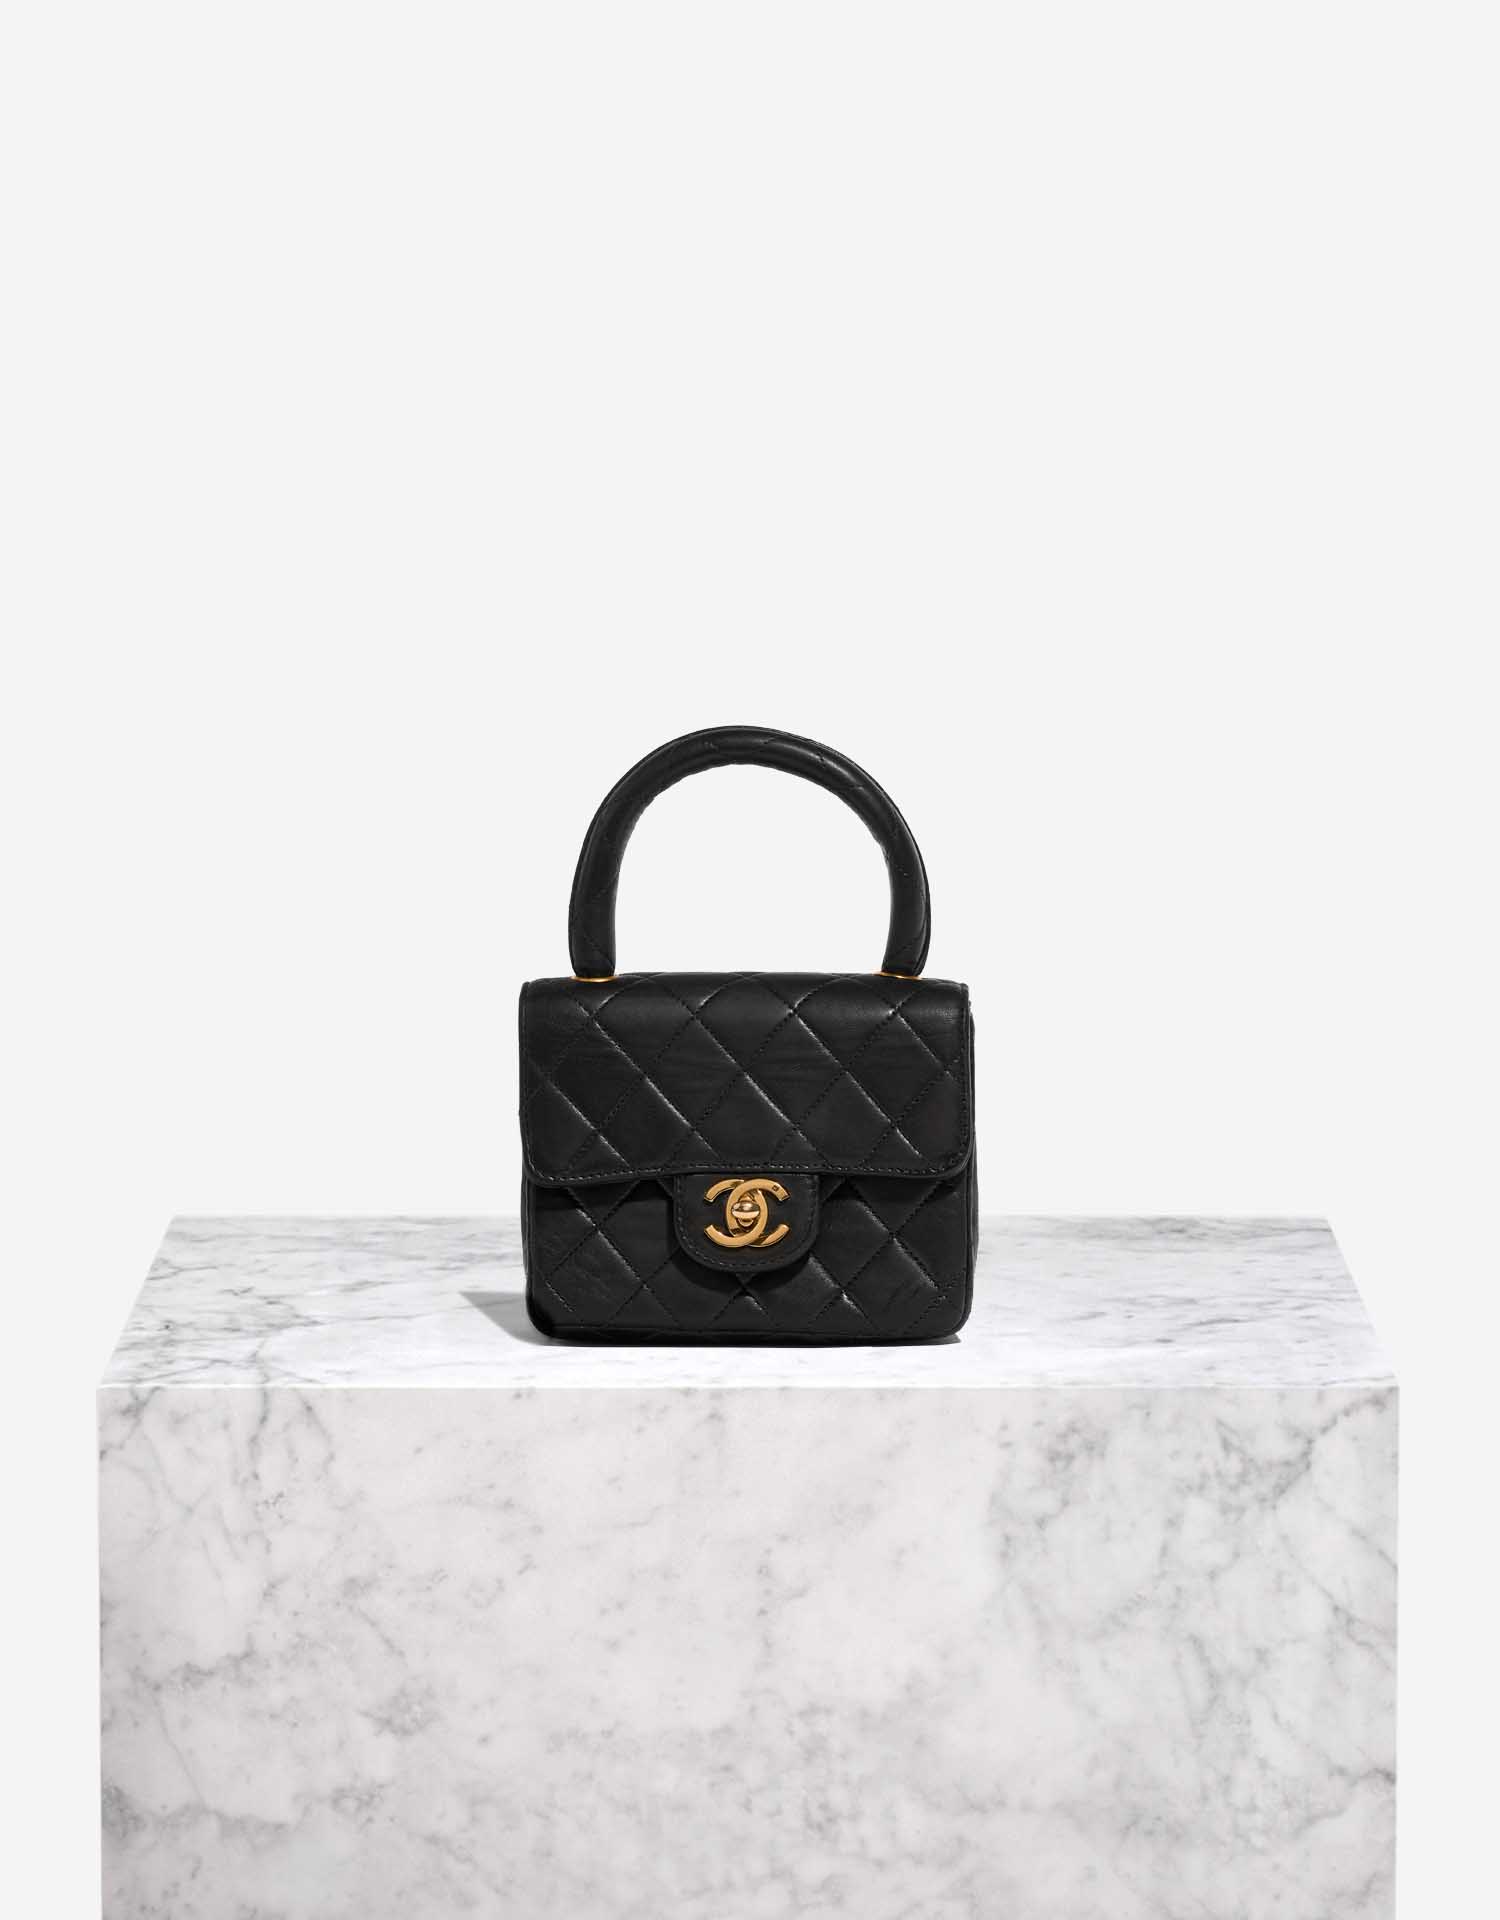 Review of Chanel Flap Bag with Top Handle Coco Handle Bag  My Golden  Beauty